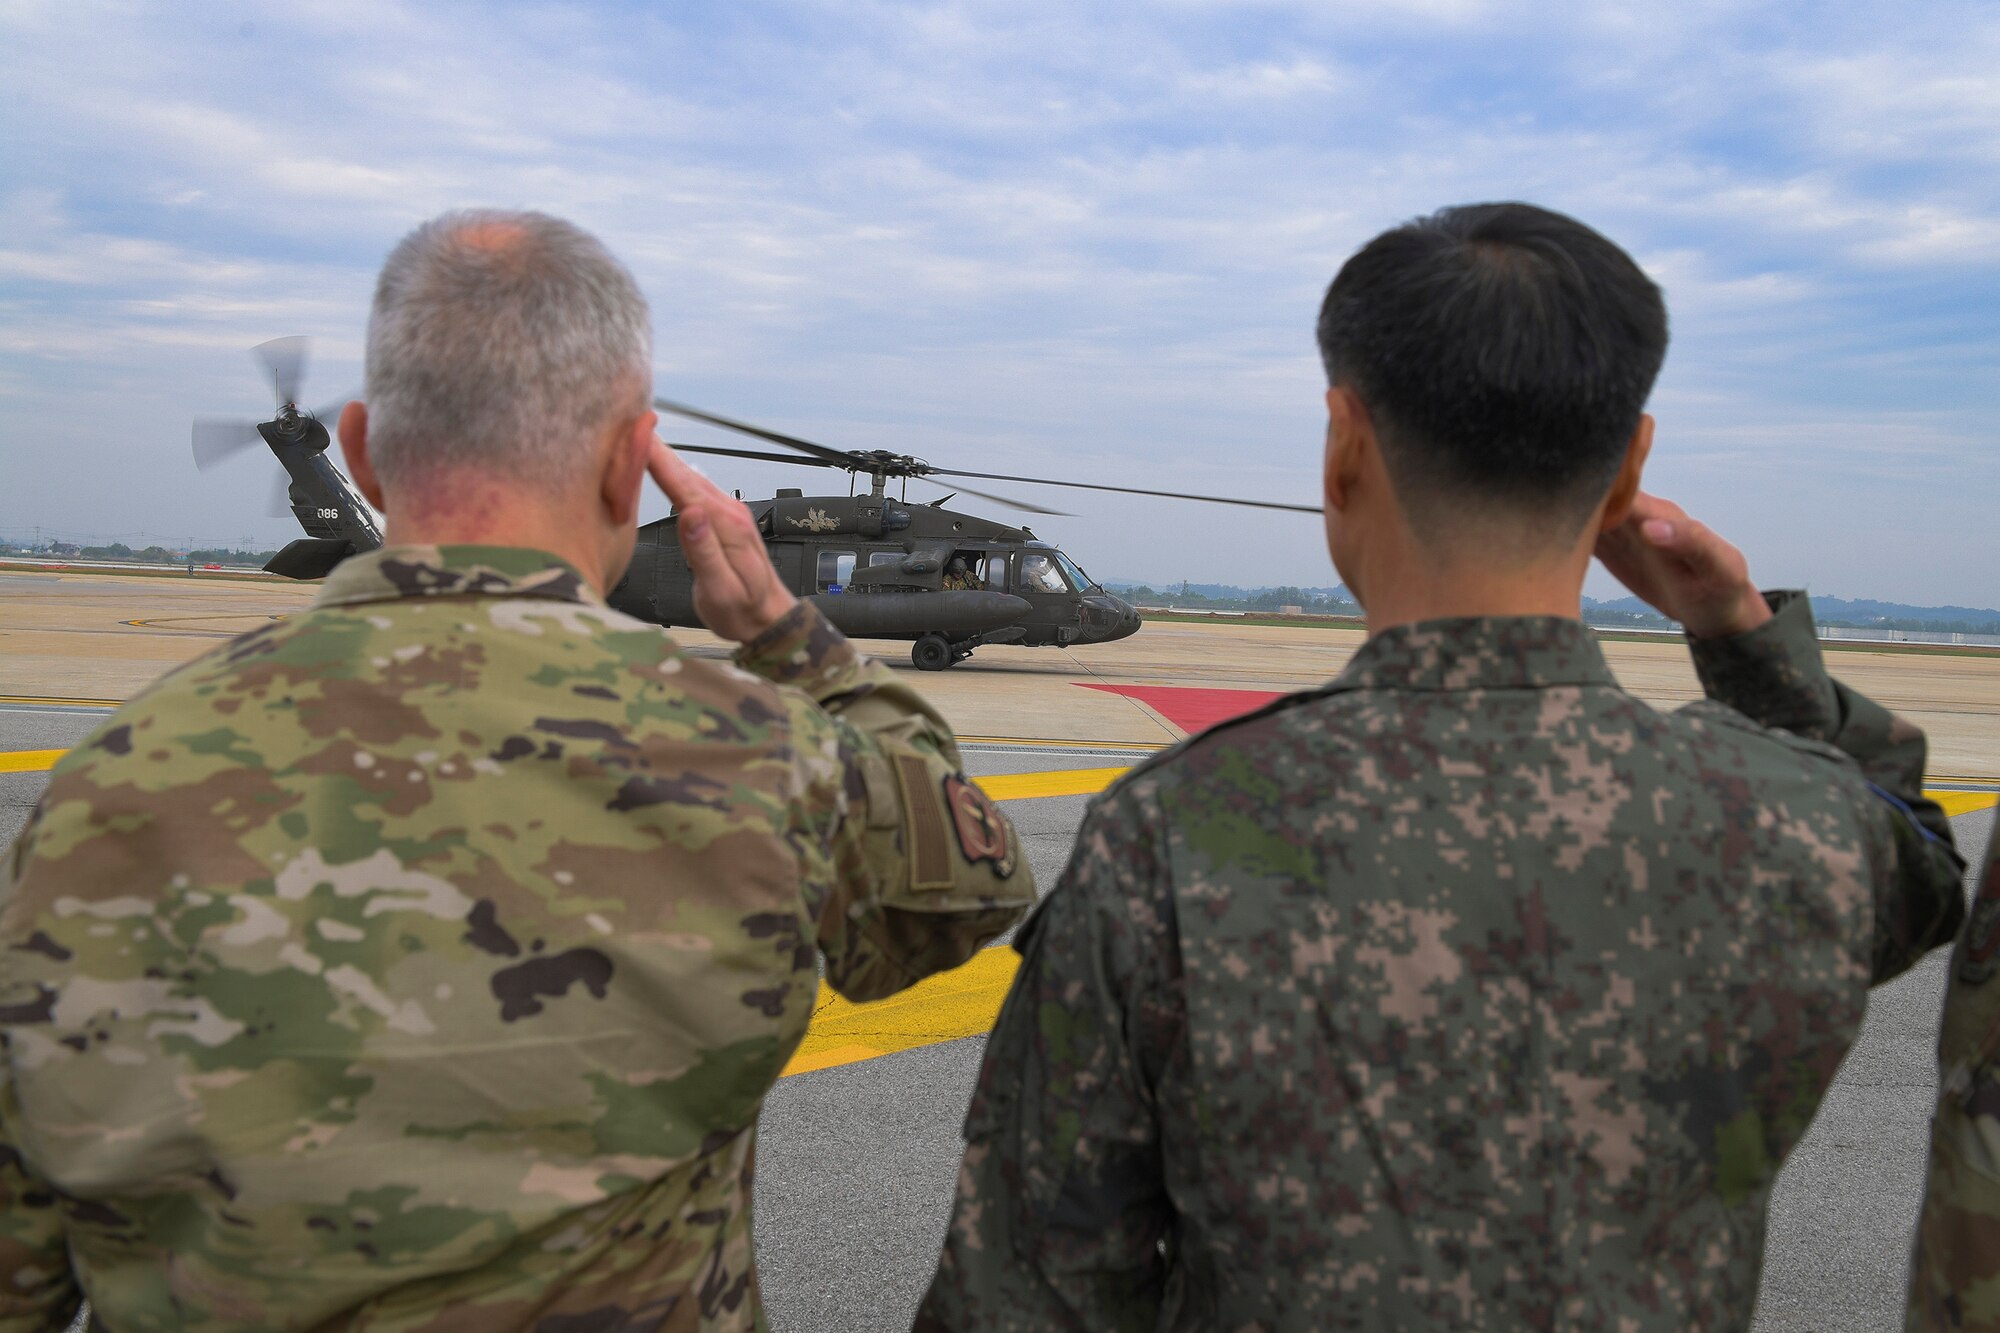 U.S. Air Force and Republic of Korea air force members salute a UH-60 Blackhawk helicopter upon the arrival of Gen. CQ Brown, Jr., Pacific Air Forces commander, Oct. 17, 2019, at Osan Air Base, ROK. While gaining an in-depth exposure of the installation’s unique mission, Brown used the visit as an opportunity to explain Pacific Air Forces’ priorities and how vital Team Osan is in contributing to the Indo-Pacific region’s security and stability. (U.S. Air Force photo by Staff Sgt. Greg Nash)